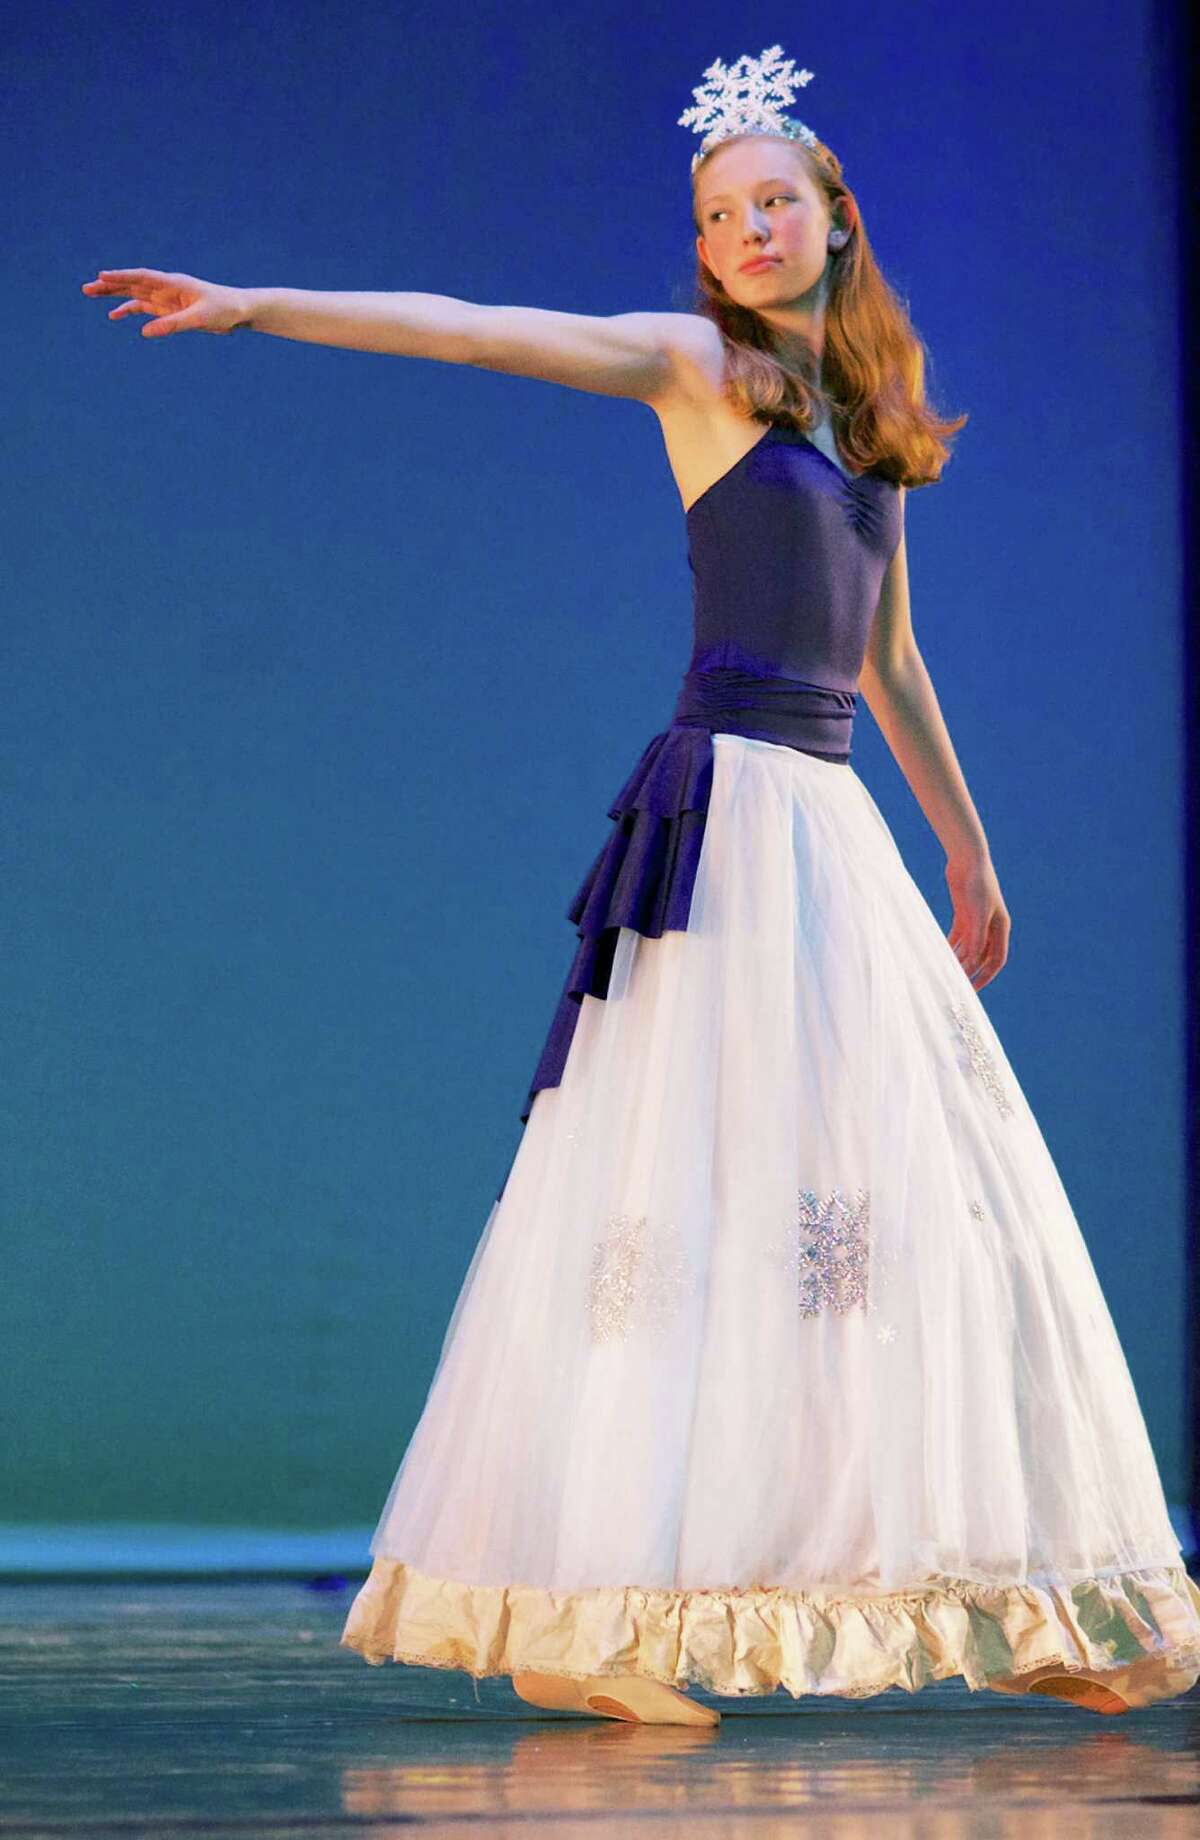 Abbi Debes, 13, of New Milford performs "The Minister of Winter" during final rehearsal for Studio D's gala dance festival at New Milford High School, May 31, 2014